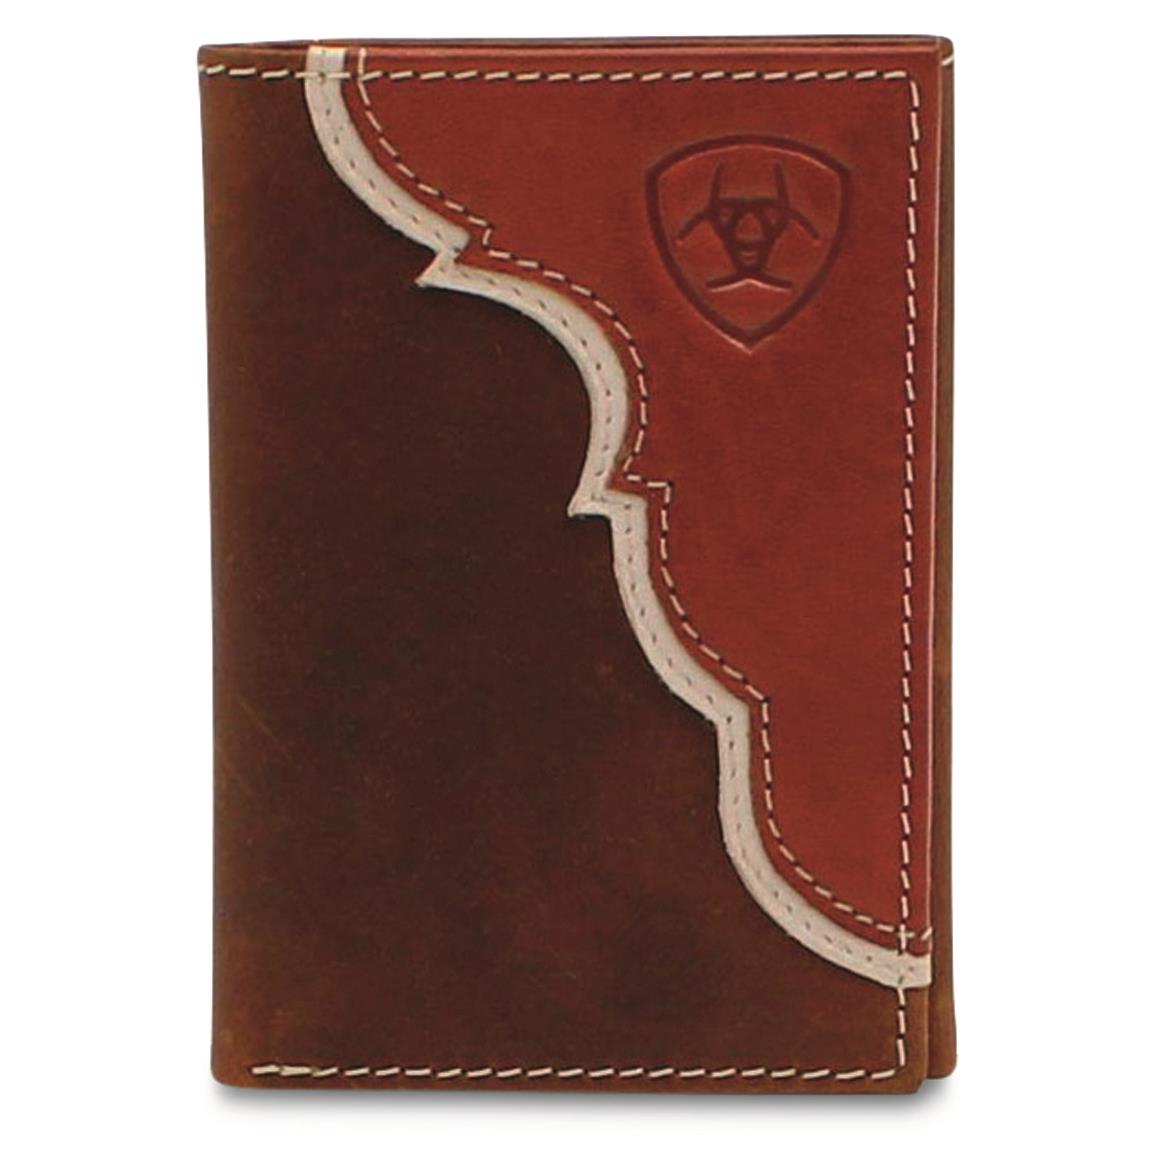 Ariat Two Tone Shield Rodeo Trifold Wallet, Tan